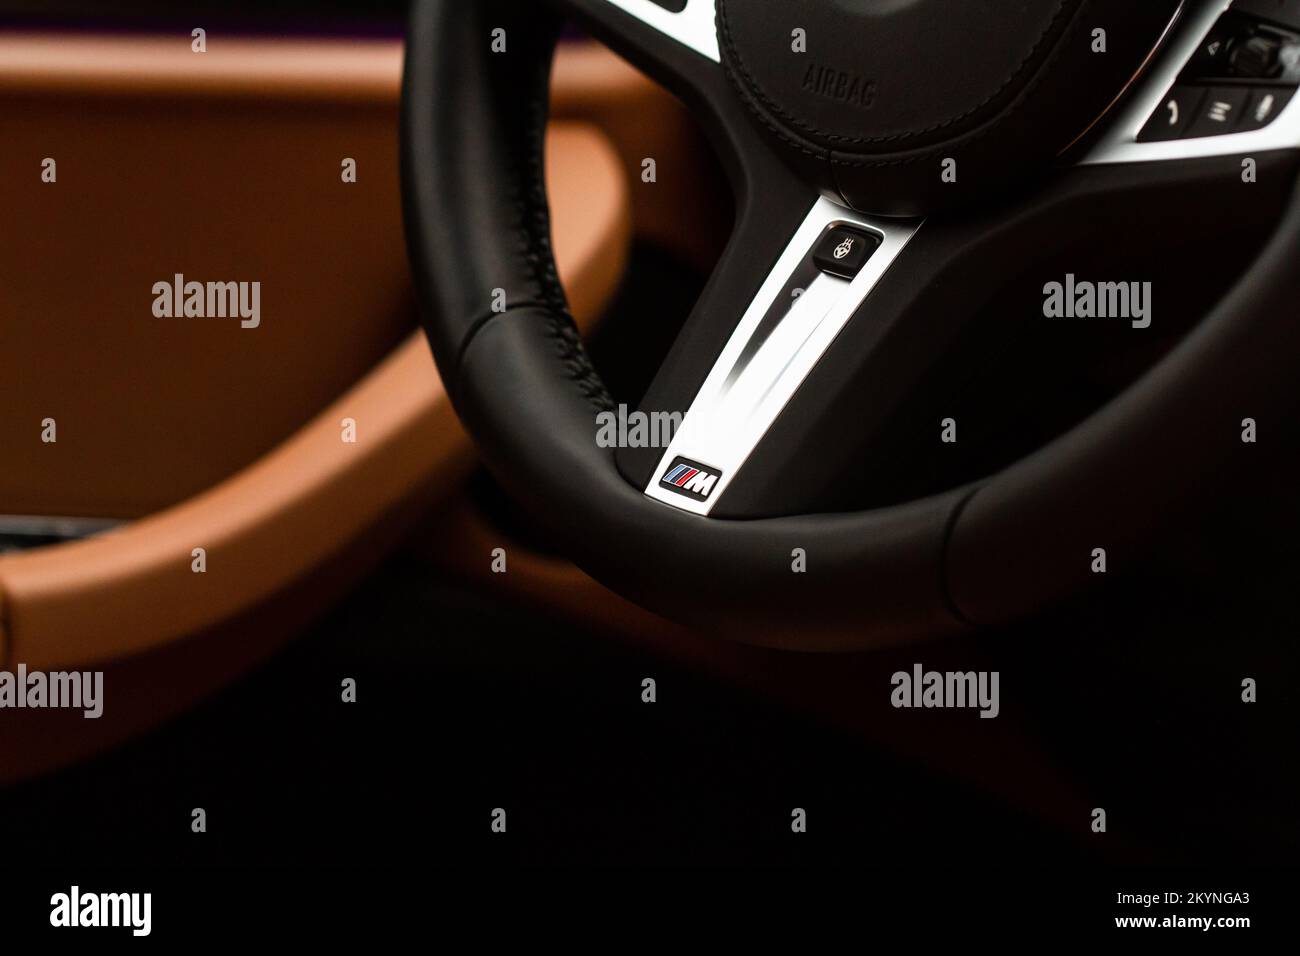 MOSCOW, RUSSIA - FEBRUARY 05, 2022 BMW M Power logo on the BMW X3 steering wheel. Steering wheel close up view. Compact luxury crossover SUV Stock Photo